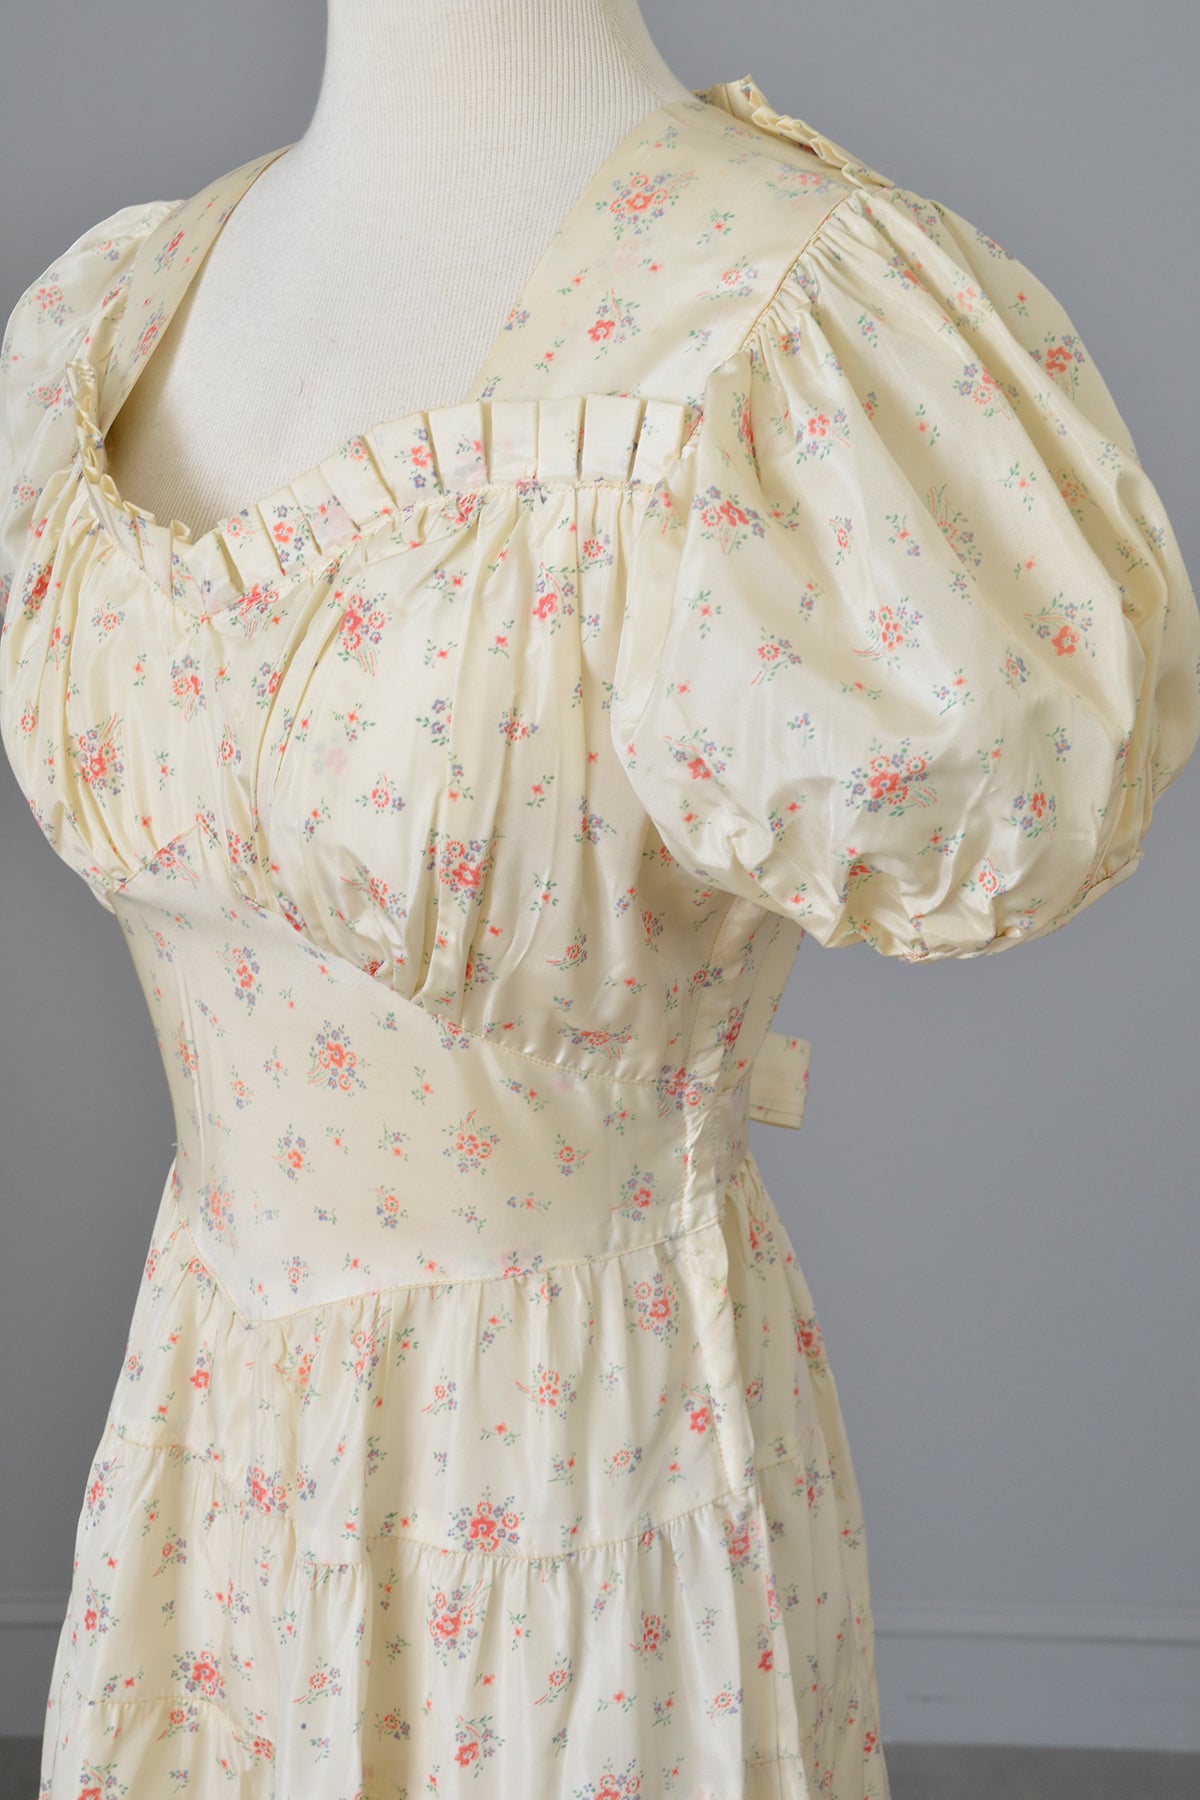 1930's Peasant Dress Tiny Flowers, Puff Sleeves, Full Tiered Skirt | Cottagecore Dress